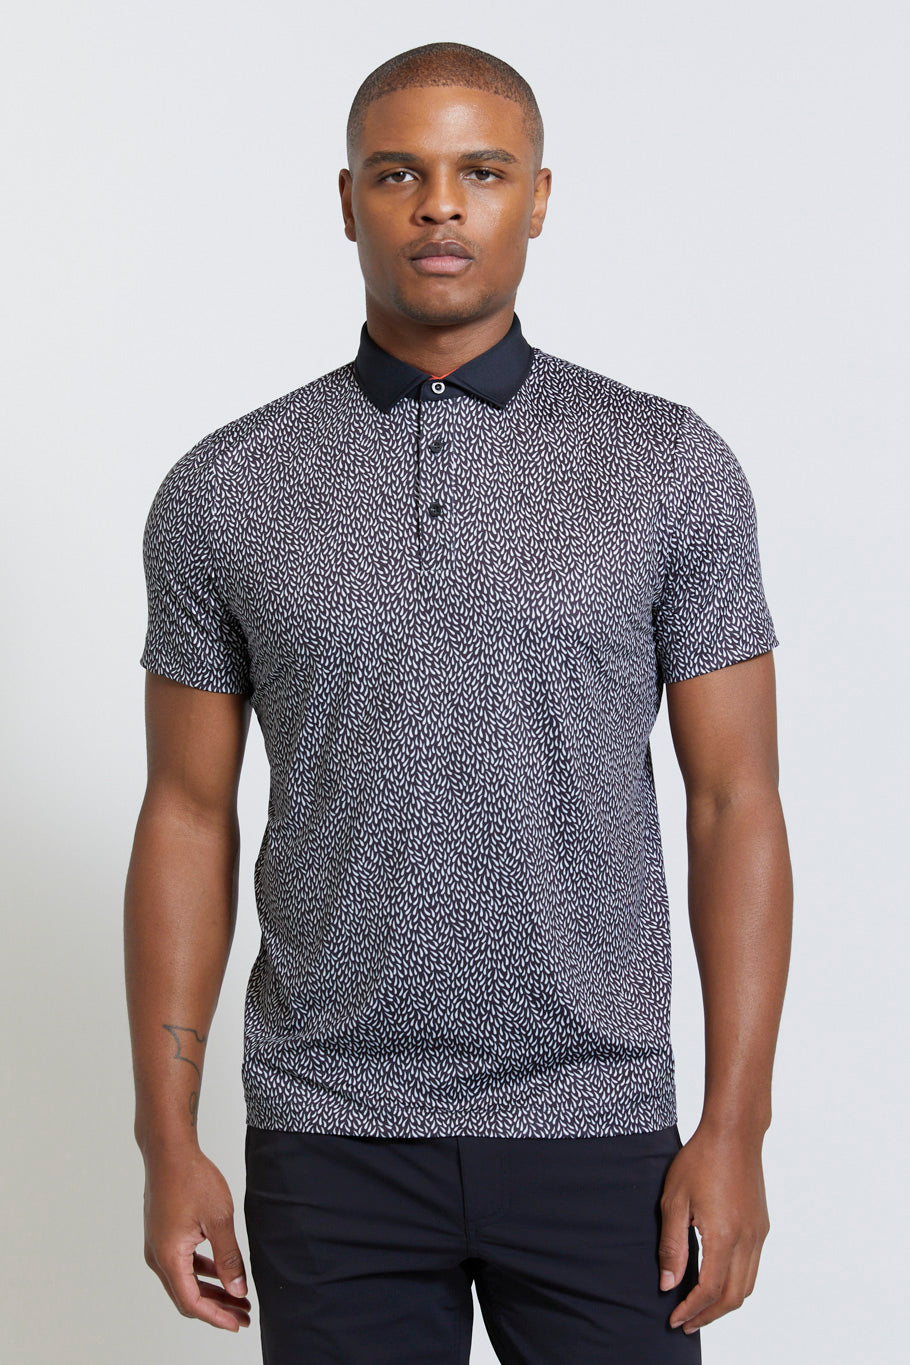 Image of the stearn polo in tuxedo